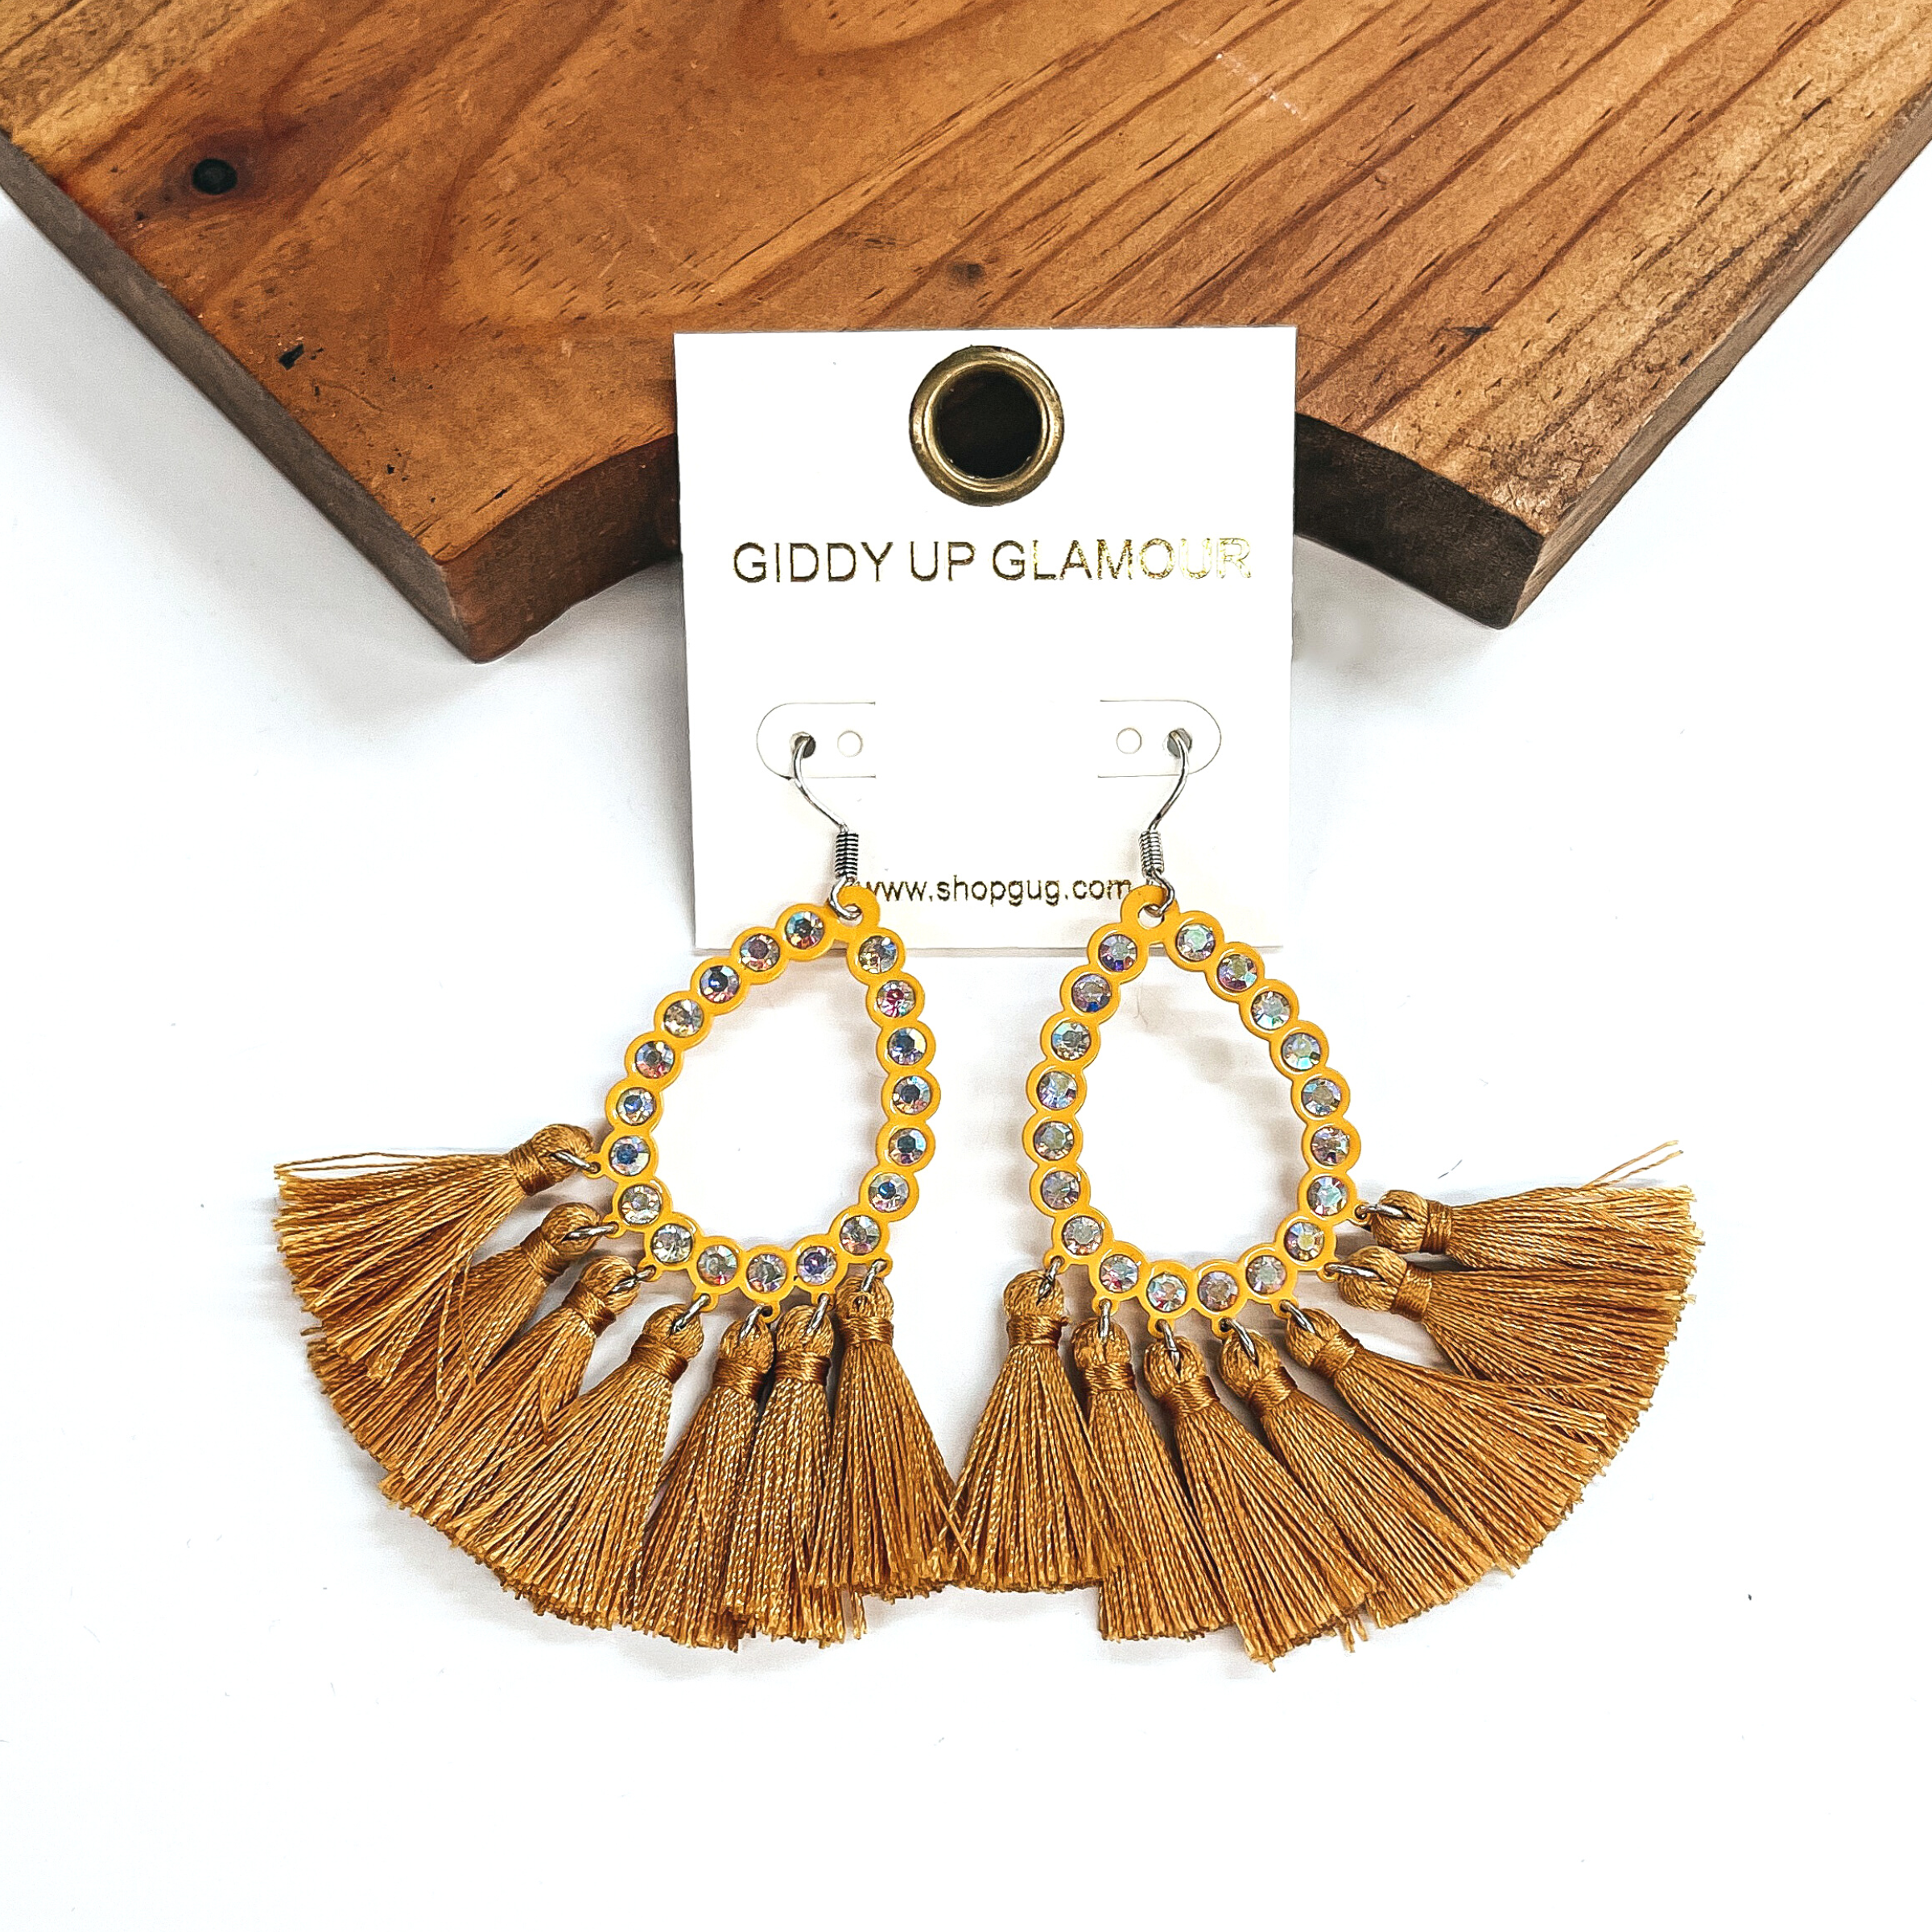 Small AB Crystal Teardrop Earrings with Tassel Trim in Mustard Yellow - Giddy Up Glamour Boutique